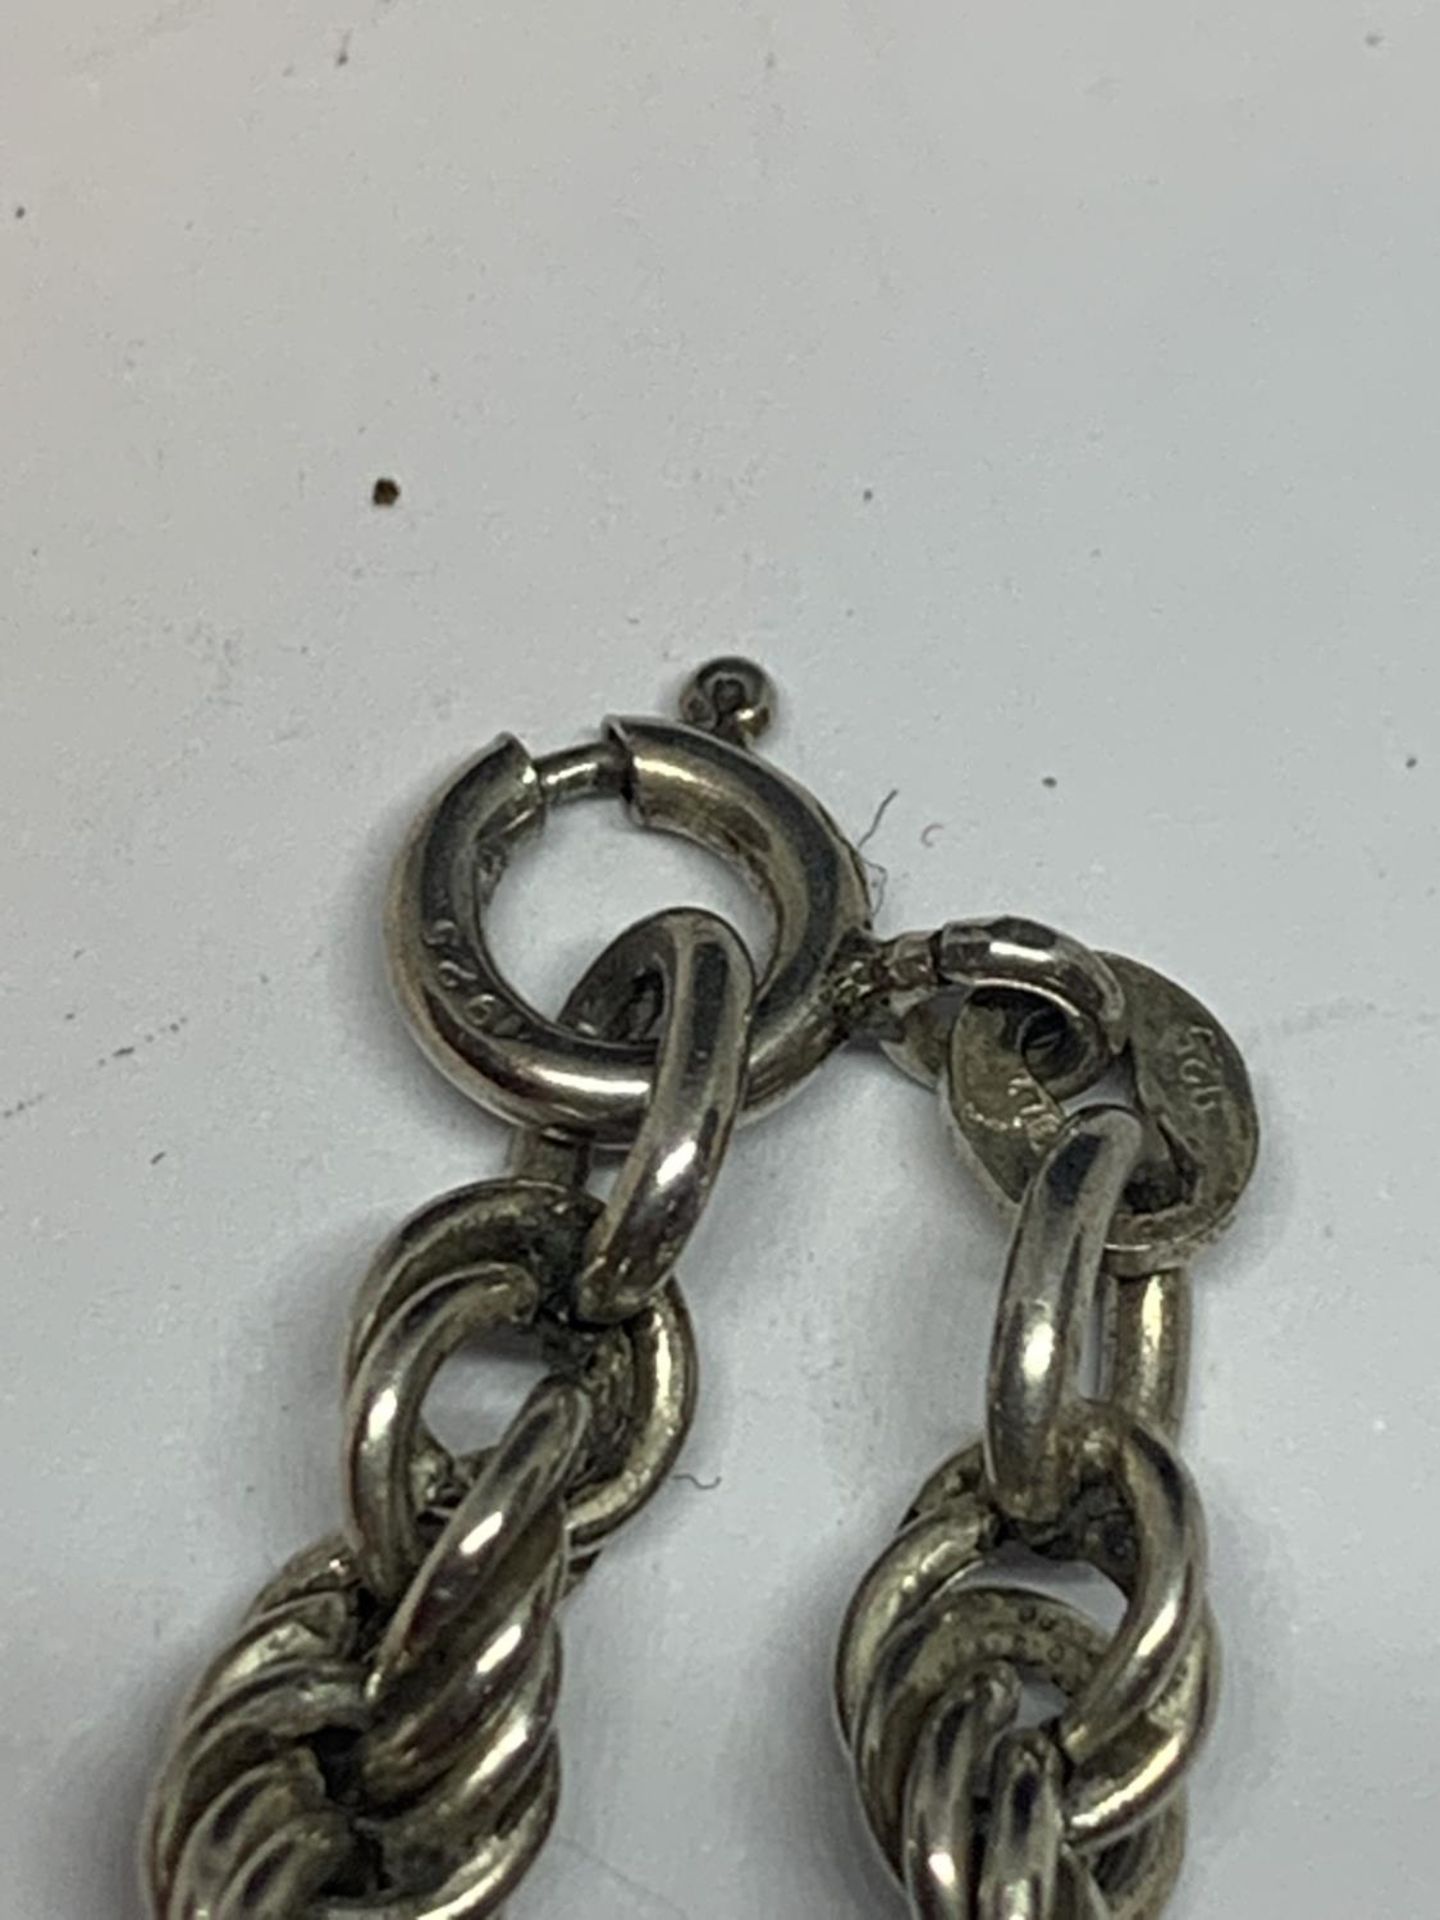 A SILVER ROPE NECKLACE 16 INCHES LONG - Image 3 of 3